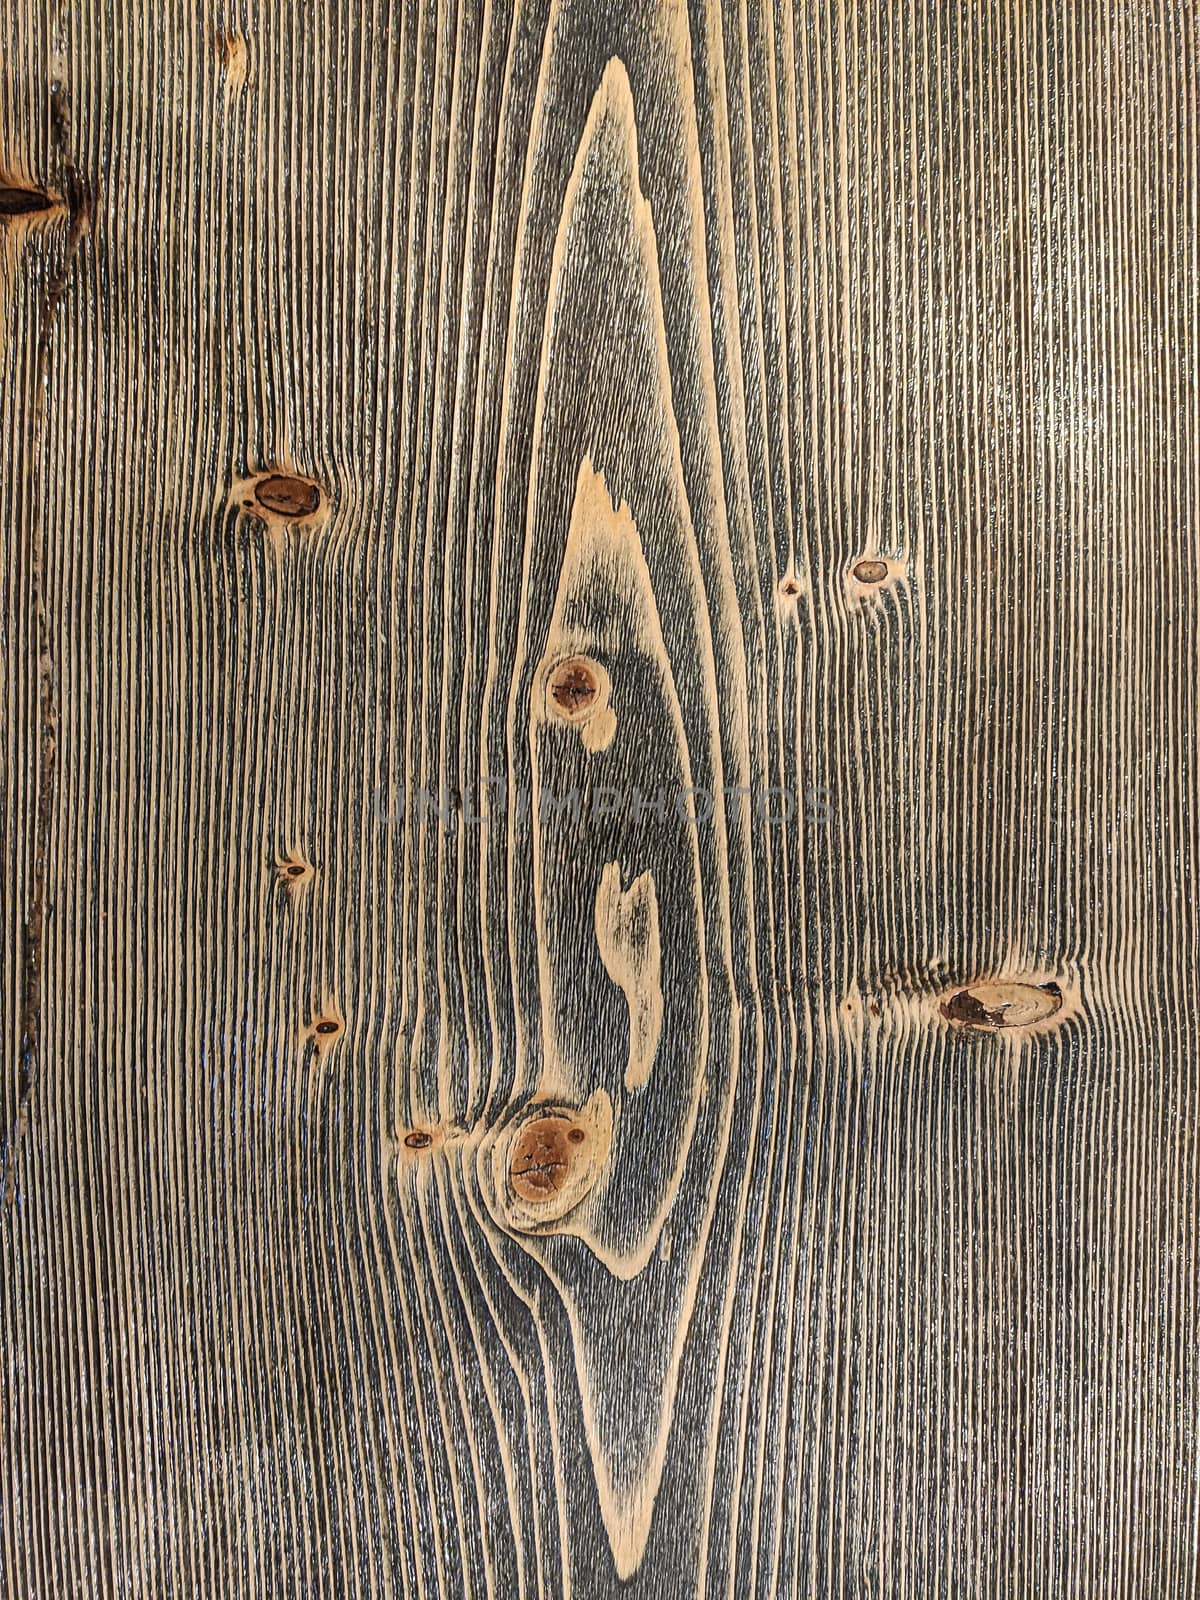 Wood texture detail 3 by pippocarlot